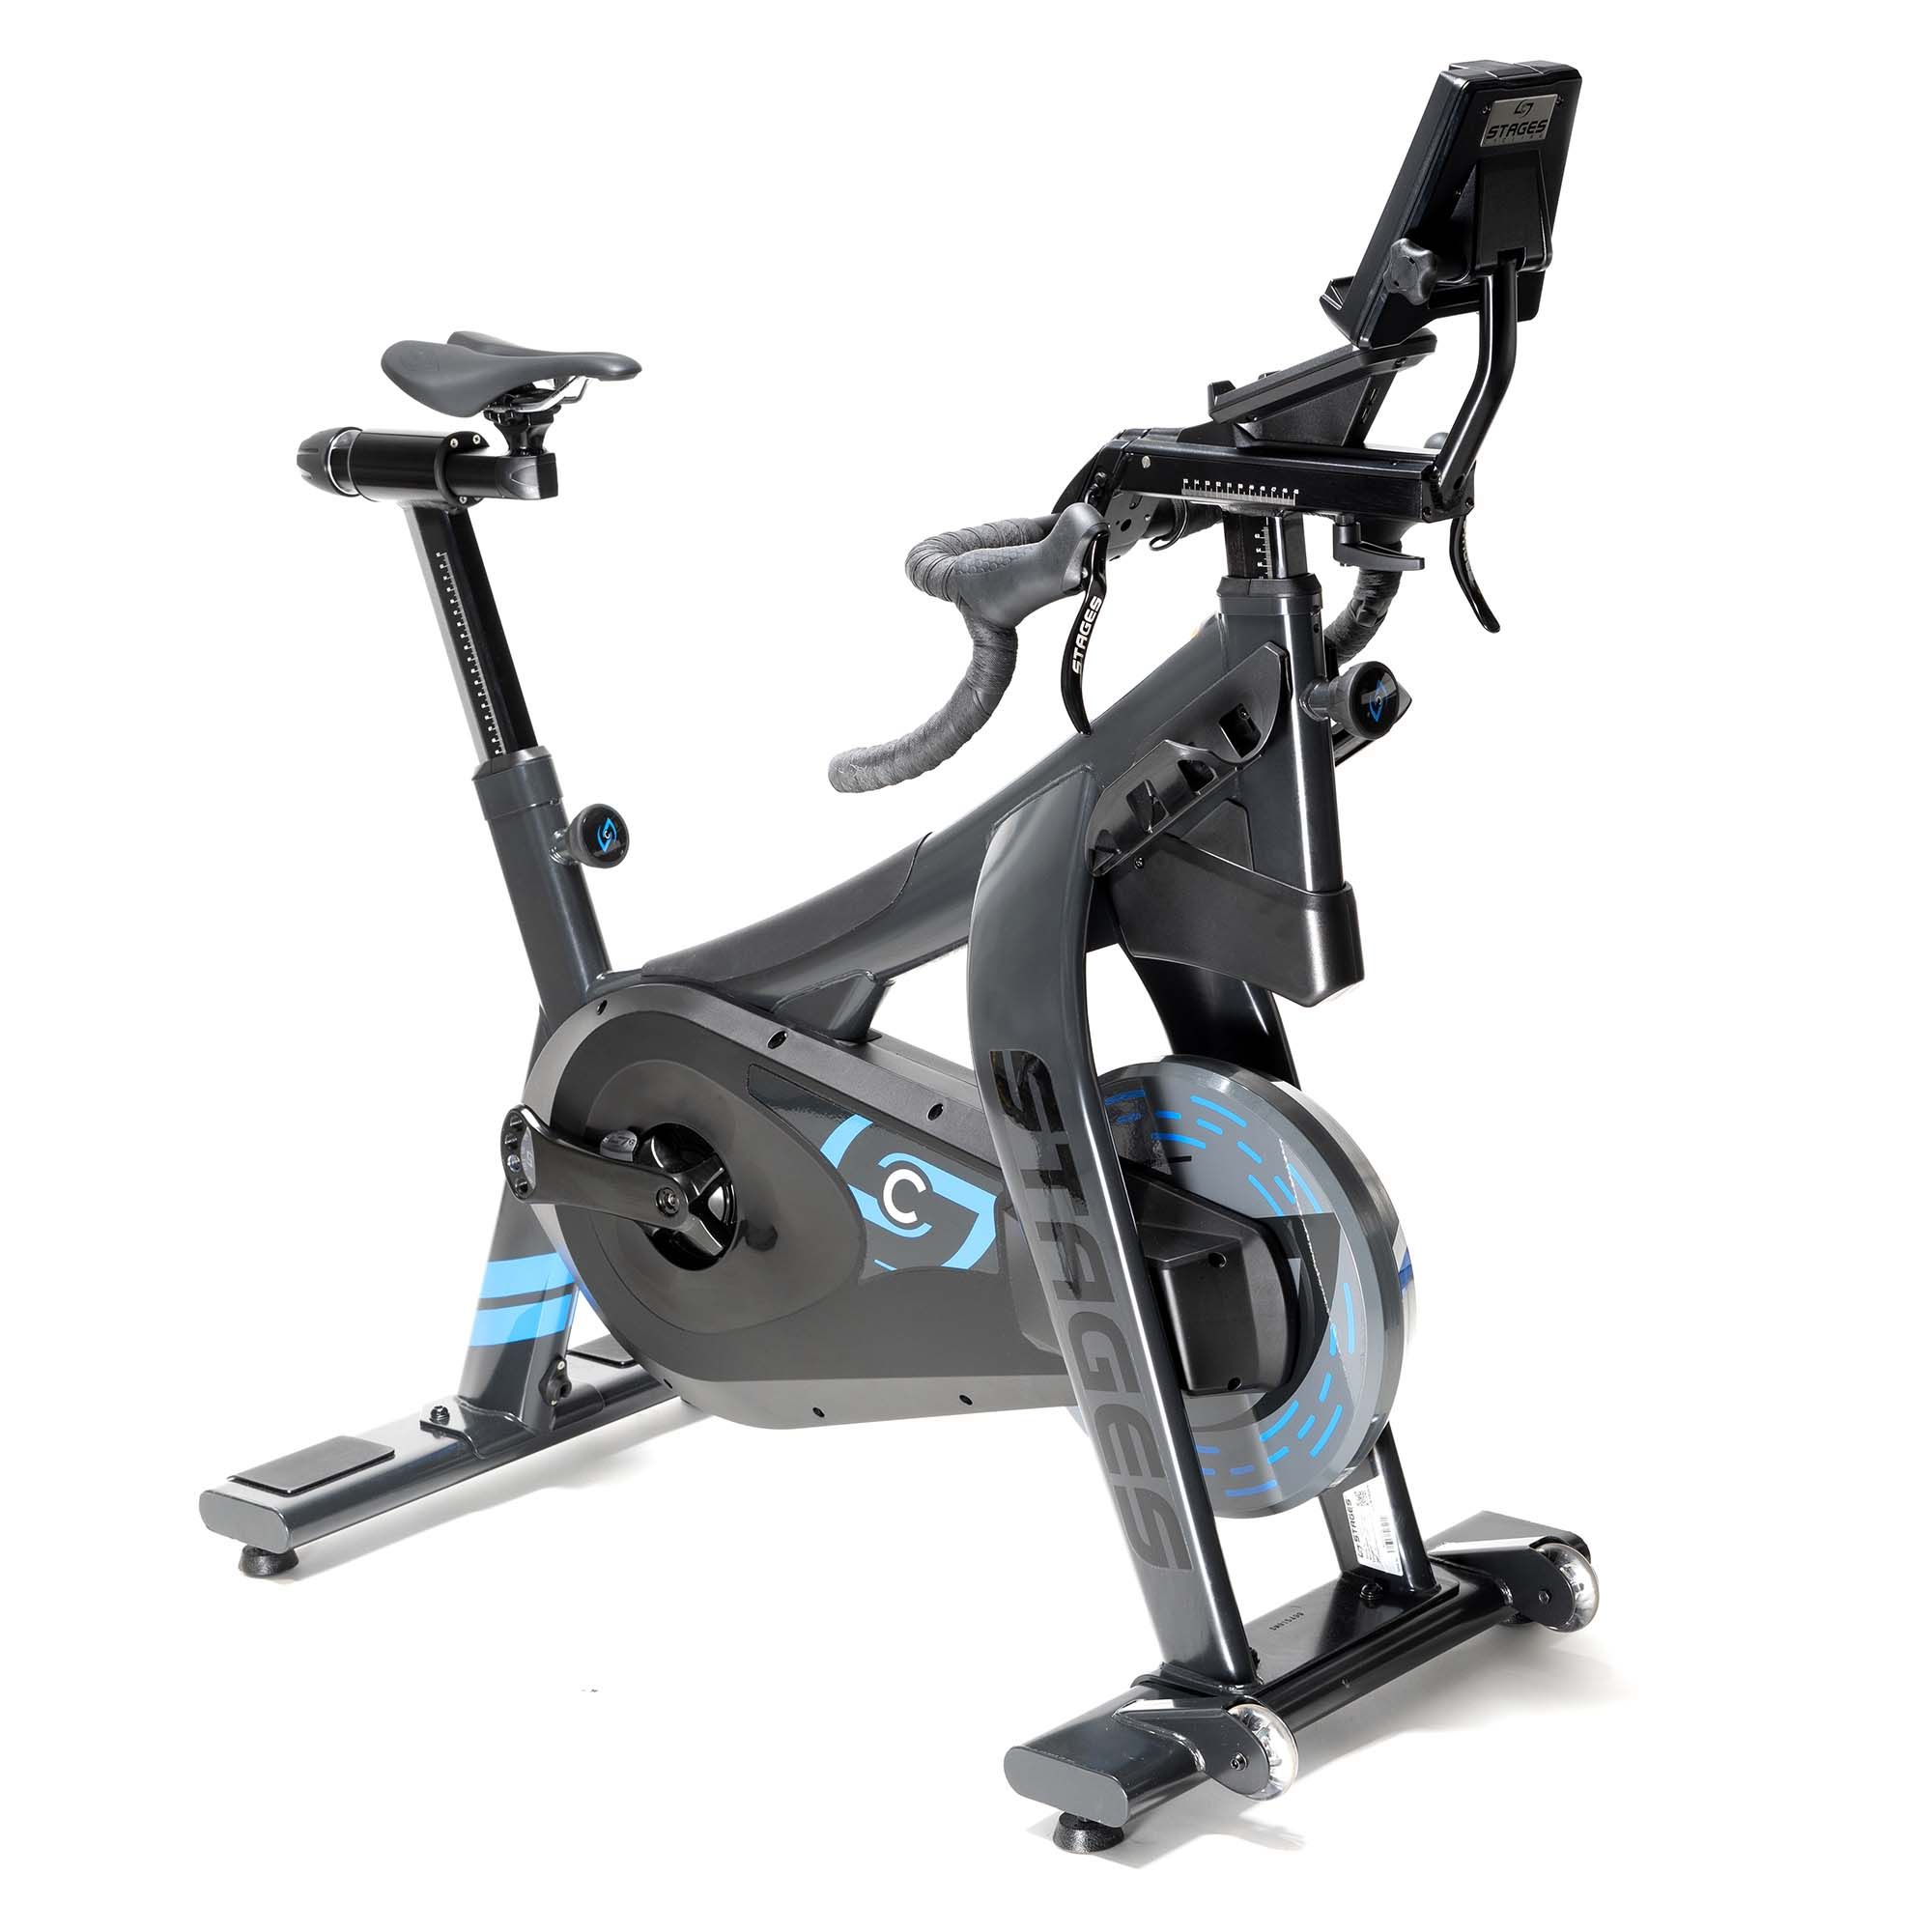 atmósfera Agacharse extremidades Stages SB20 Smart Bike Indoor Trainer | Stages Cycling